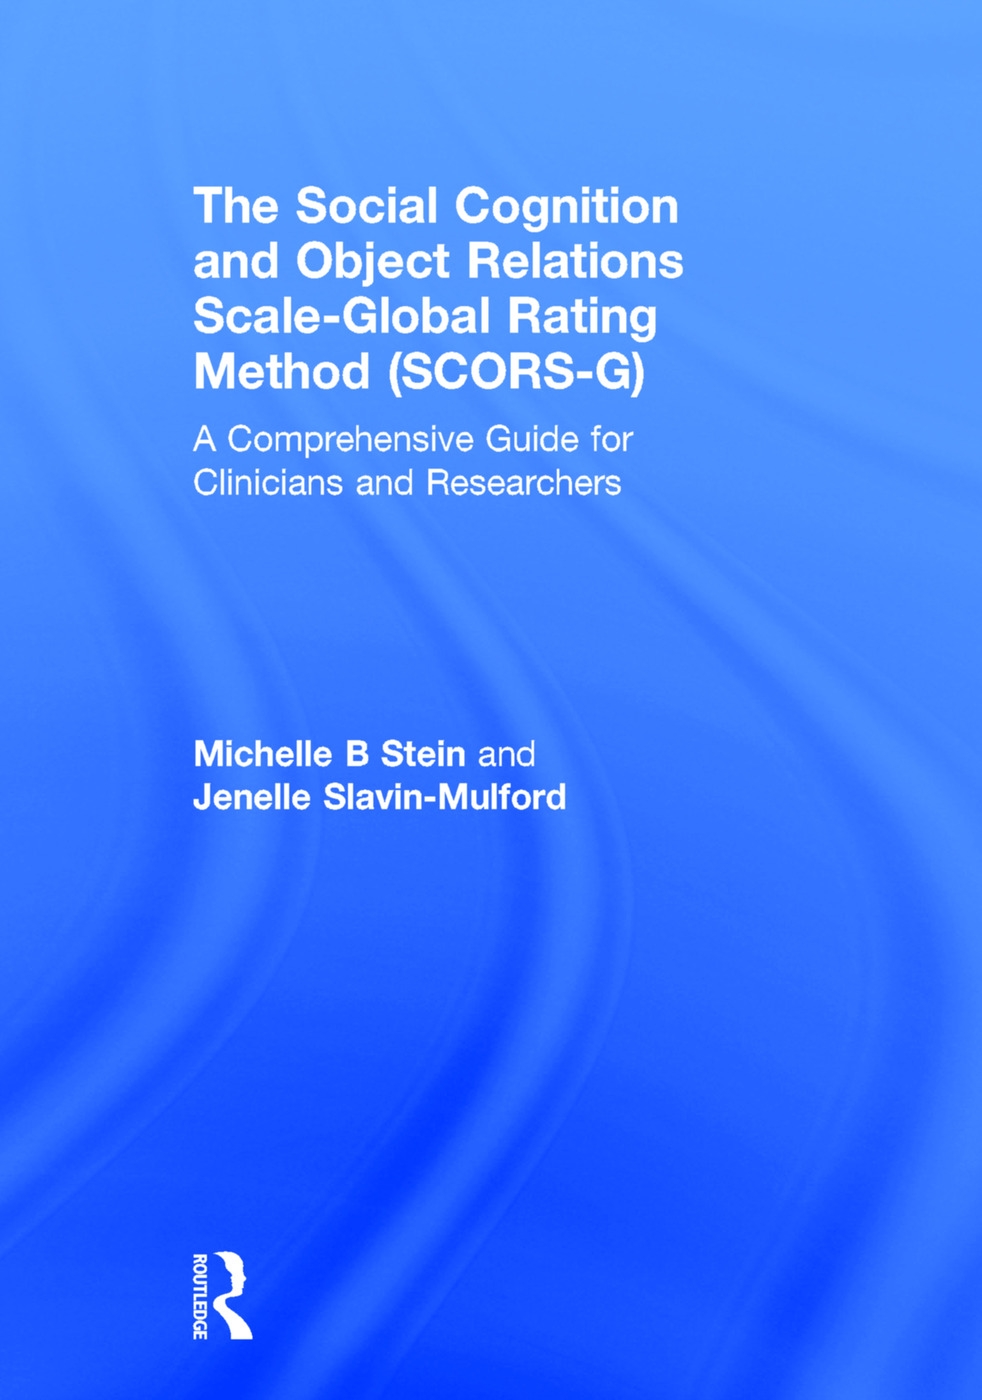 The Social Cognition and Object Relations Scale-Global Rating Method (Scors-G): A Comprehensive Guide for Clinicians and Researchers